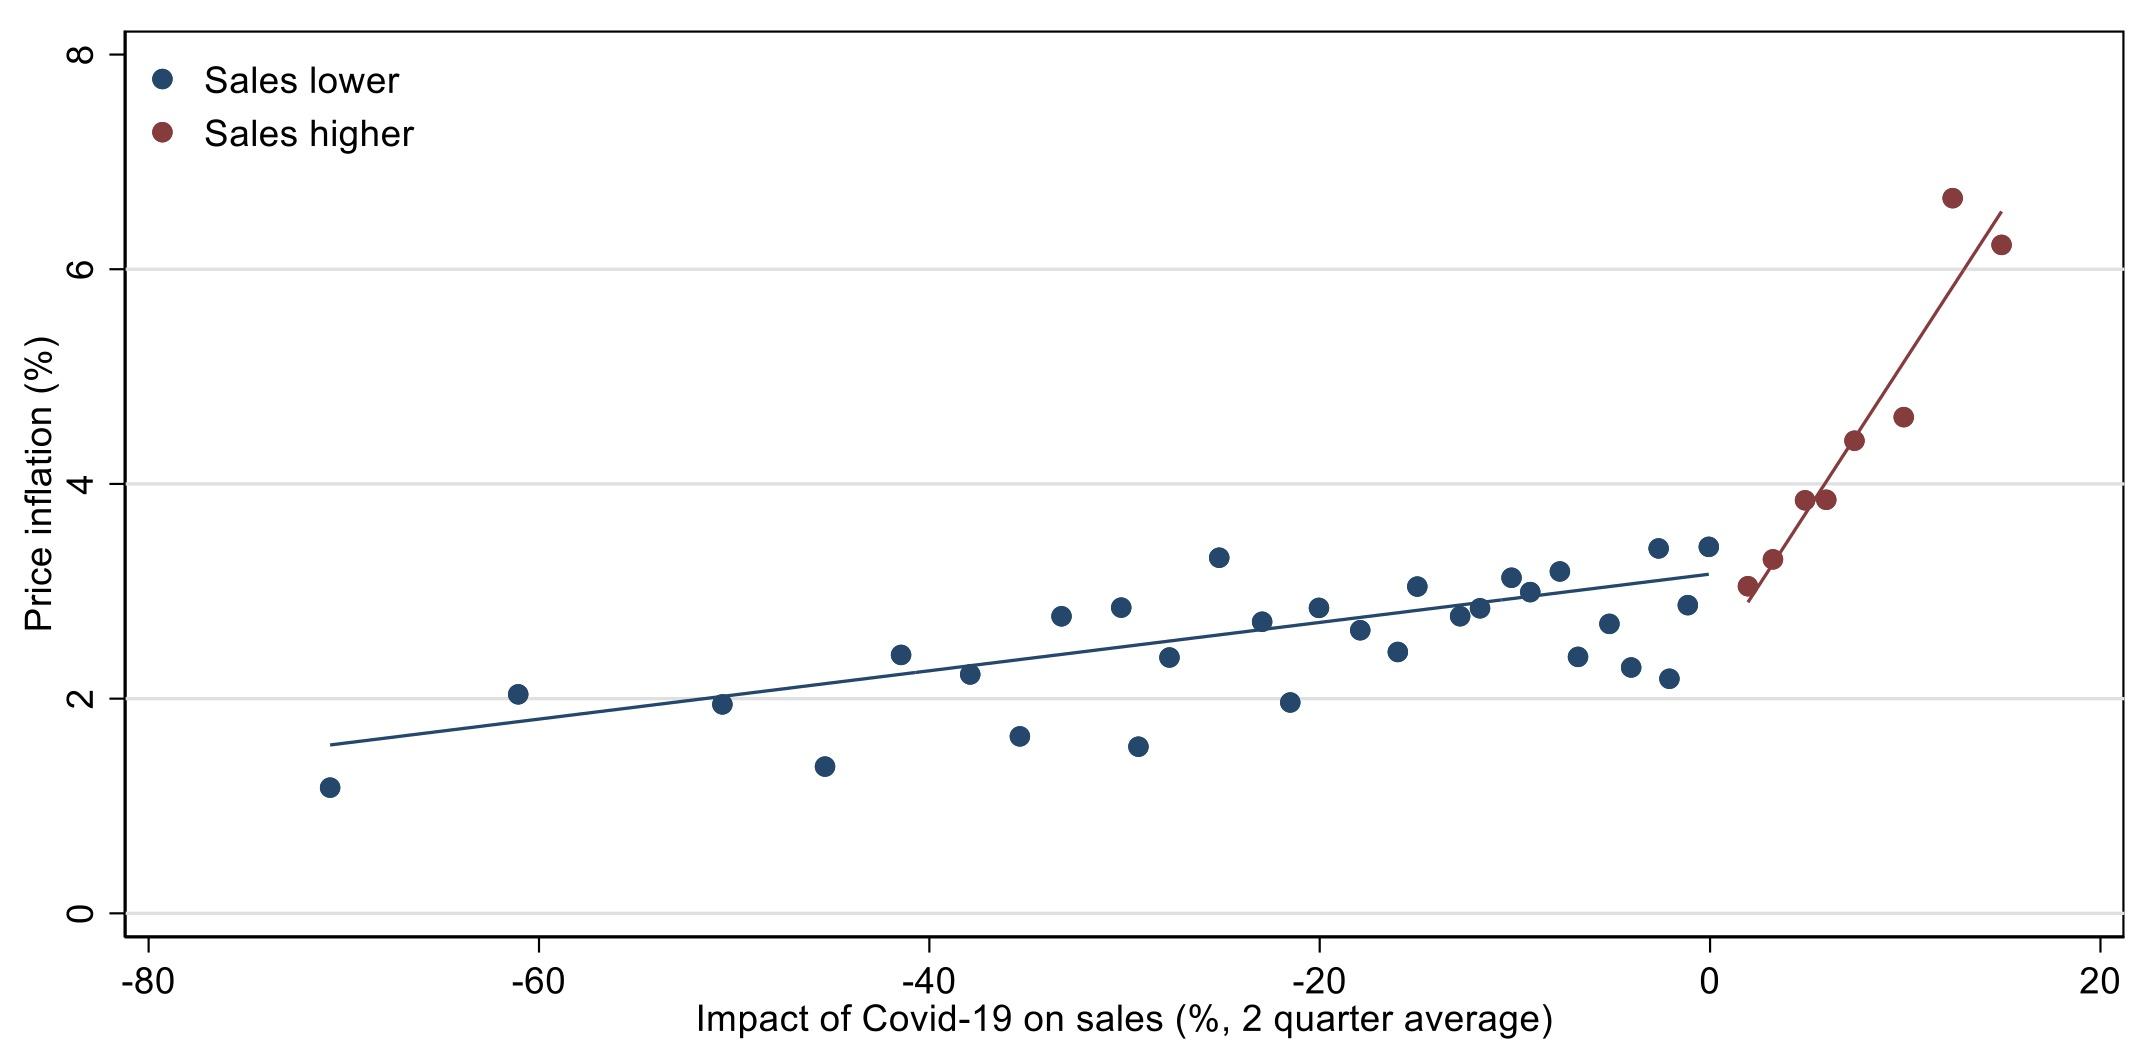 Realised inflation and the impact of Covid-19 on sales